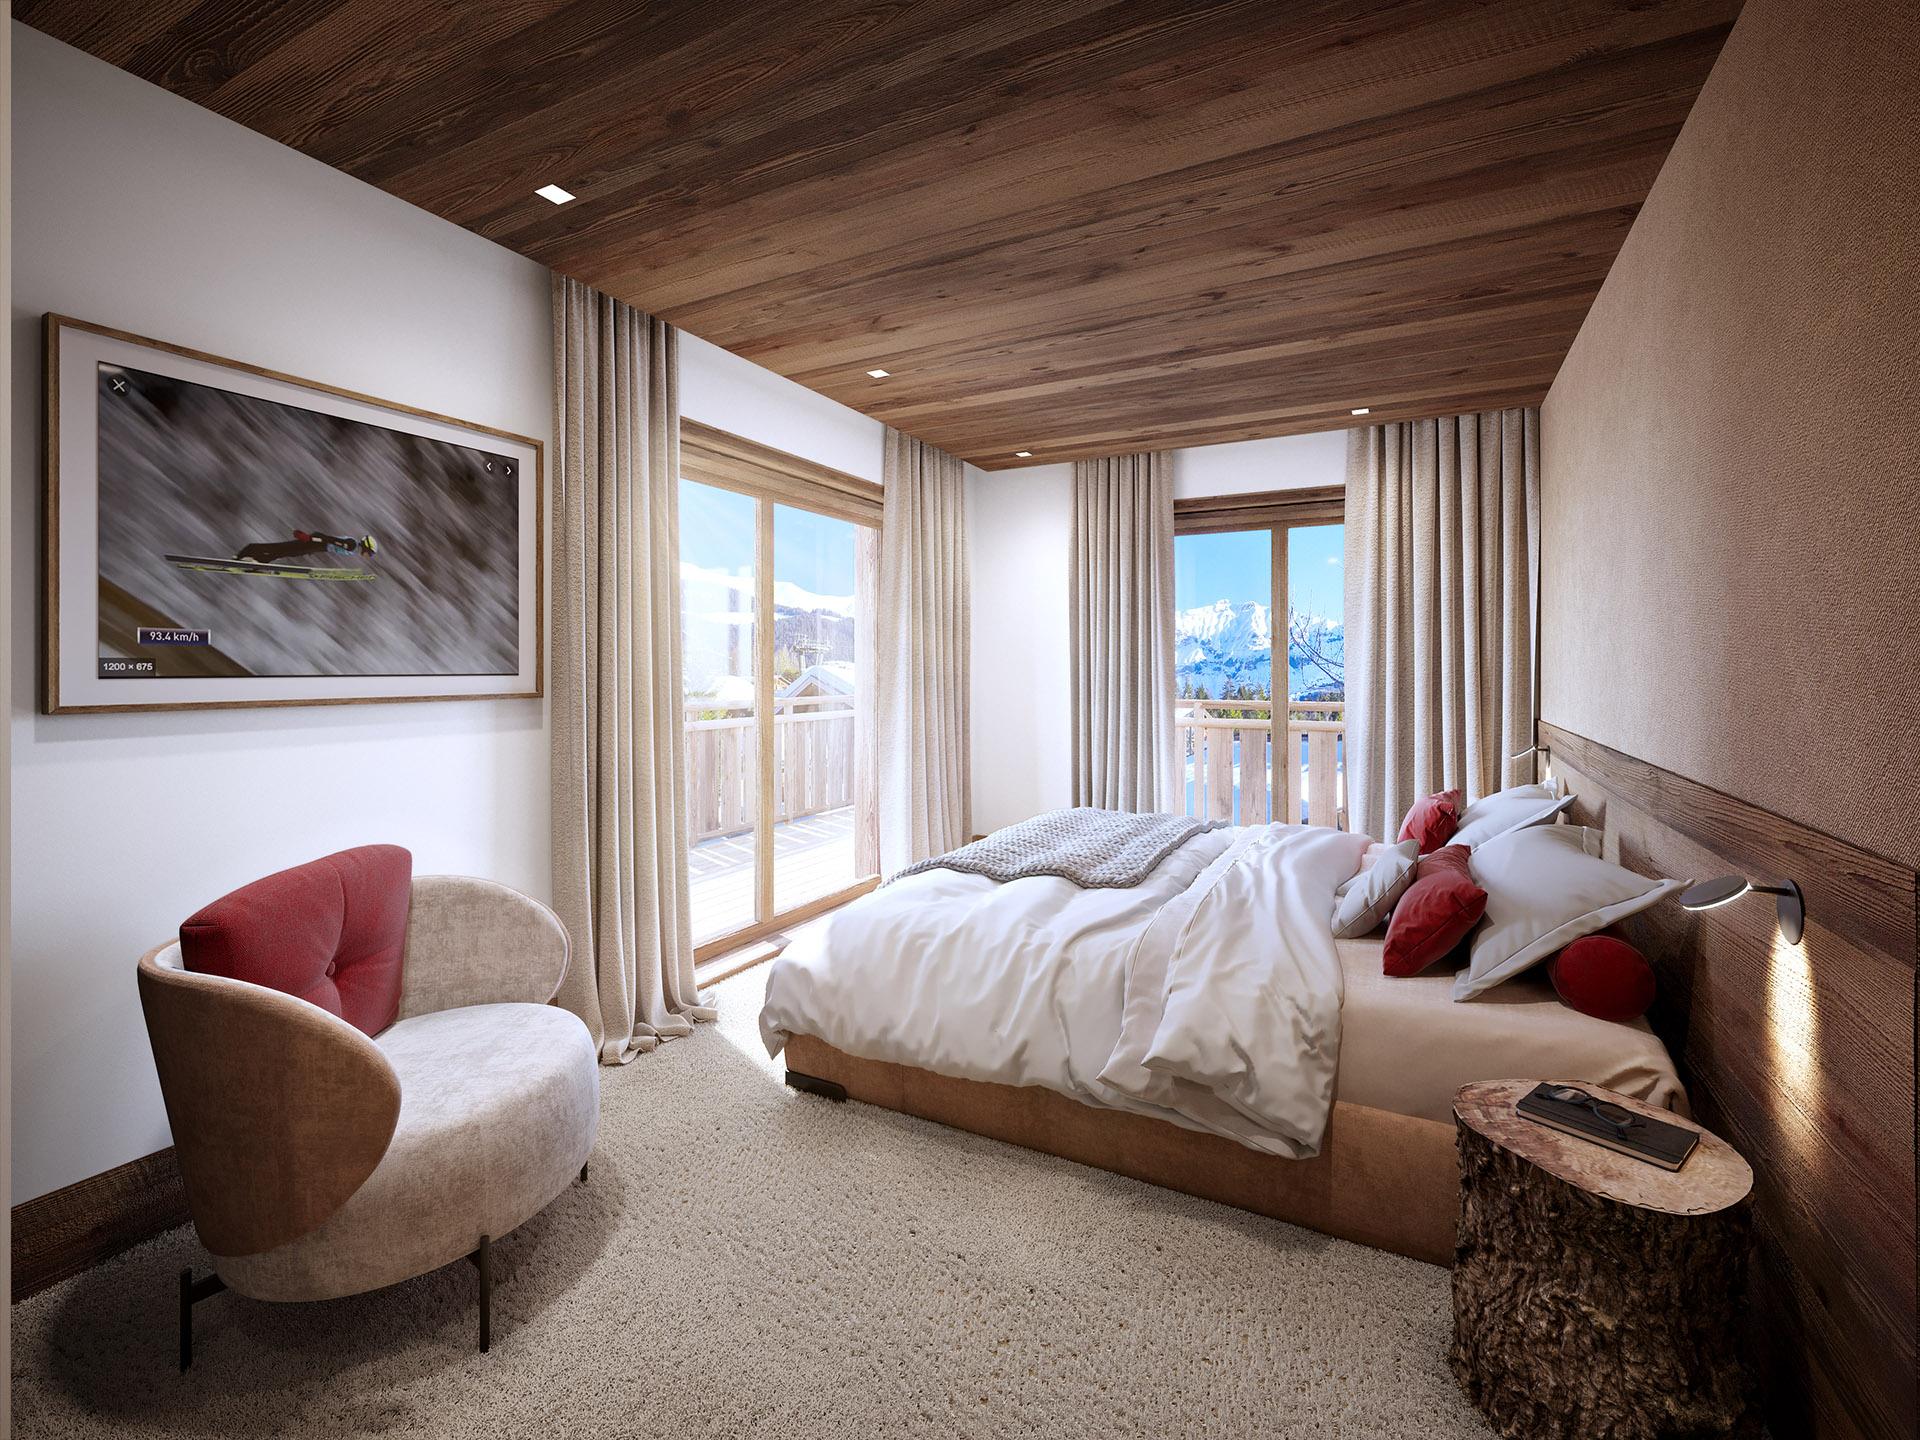 3D graphics of a room in a mountain chalet